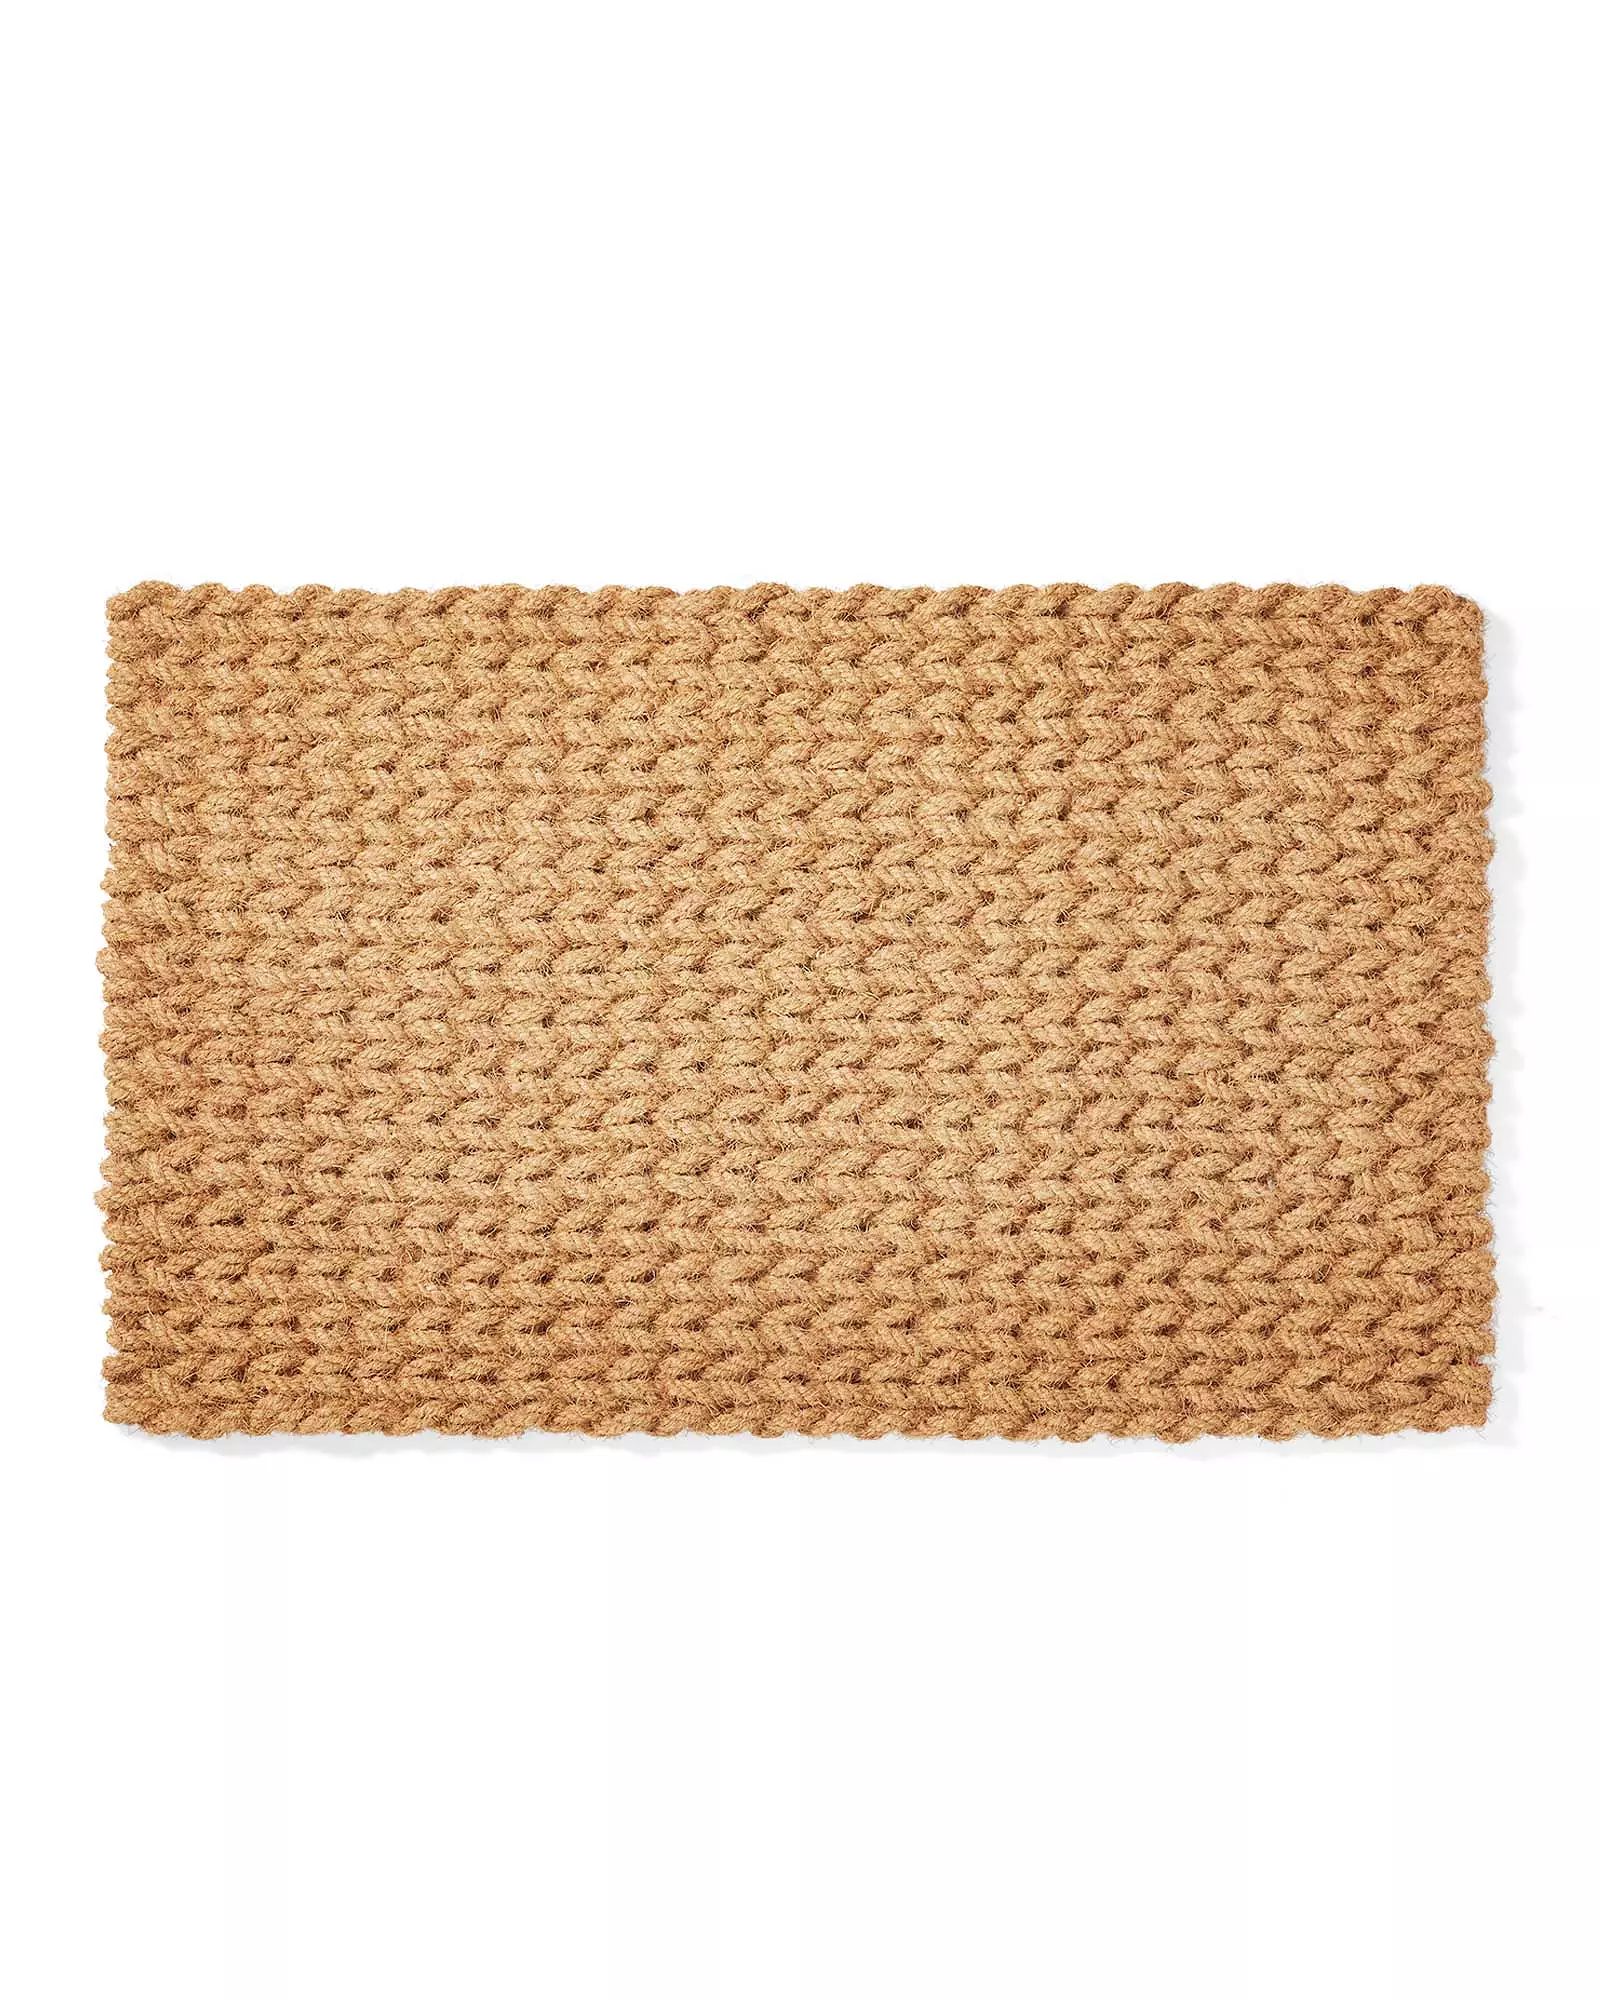 Braided Coir Doormat | Serena and Lily